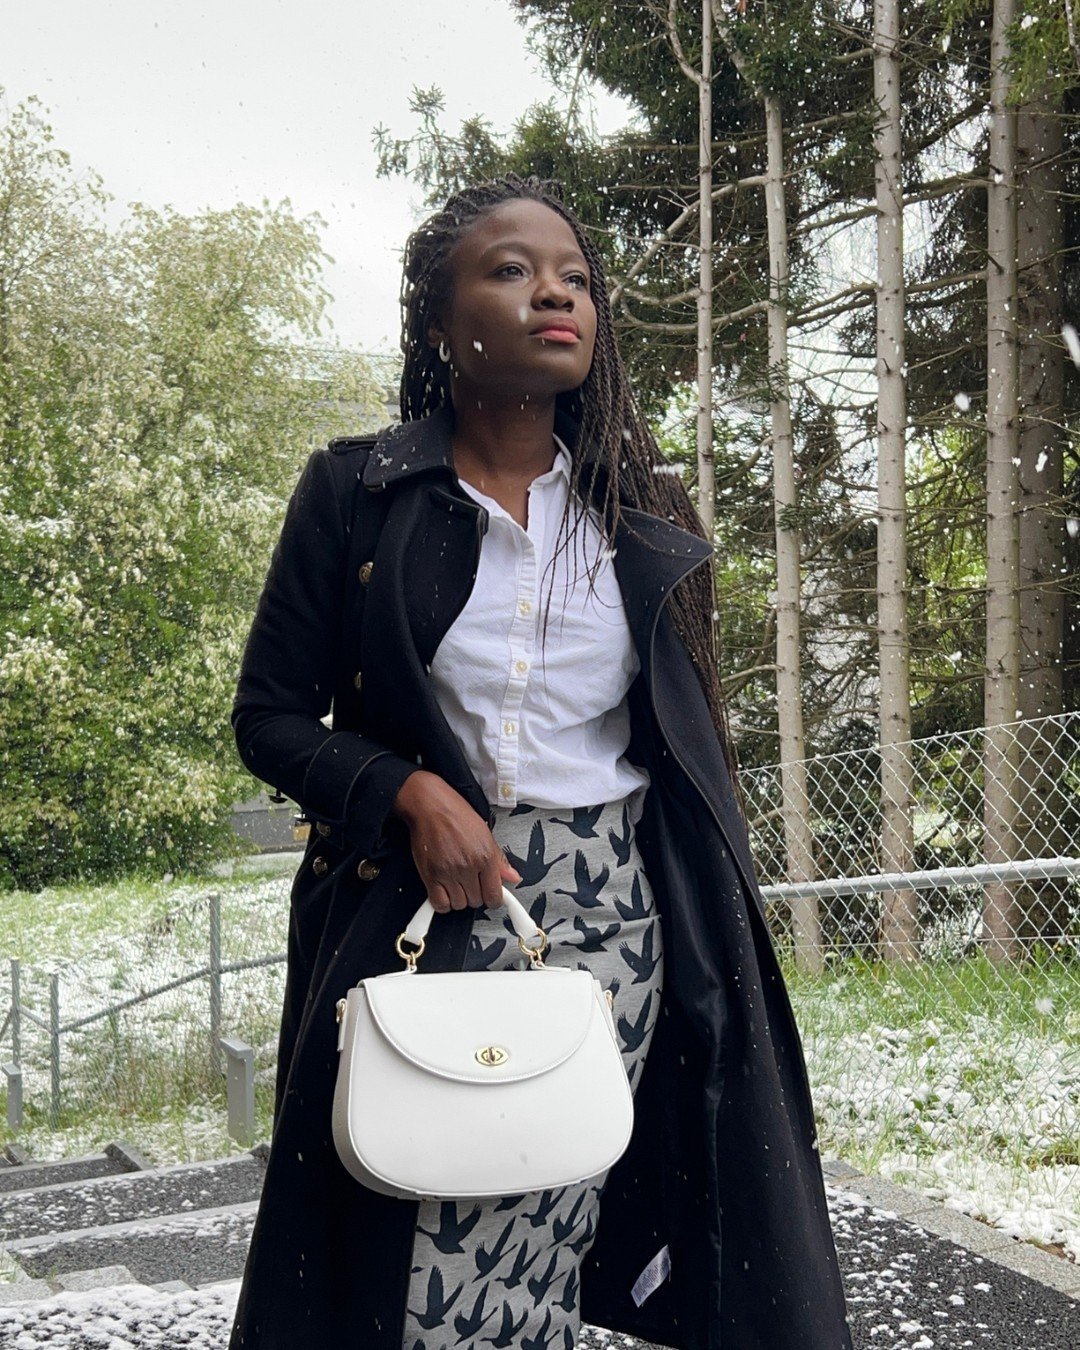 We're saying bye to the snow, but we're never saying bye to a simple white leather handbag.

Even if you're not about the all white handbag life, customize the straps to what ever color your heart desires 🖤

Get your Laoise handbag at KAEINTHE.com

